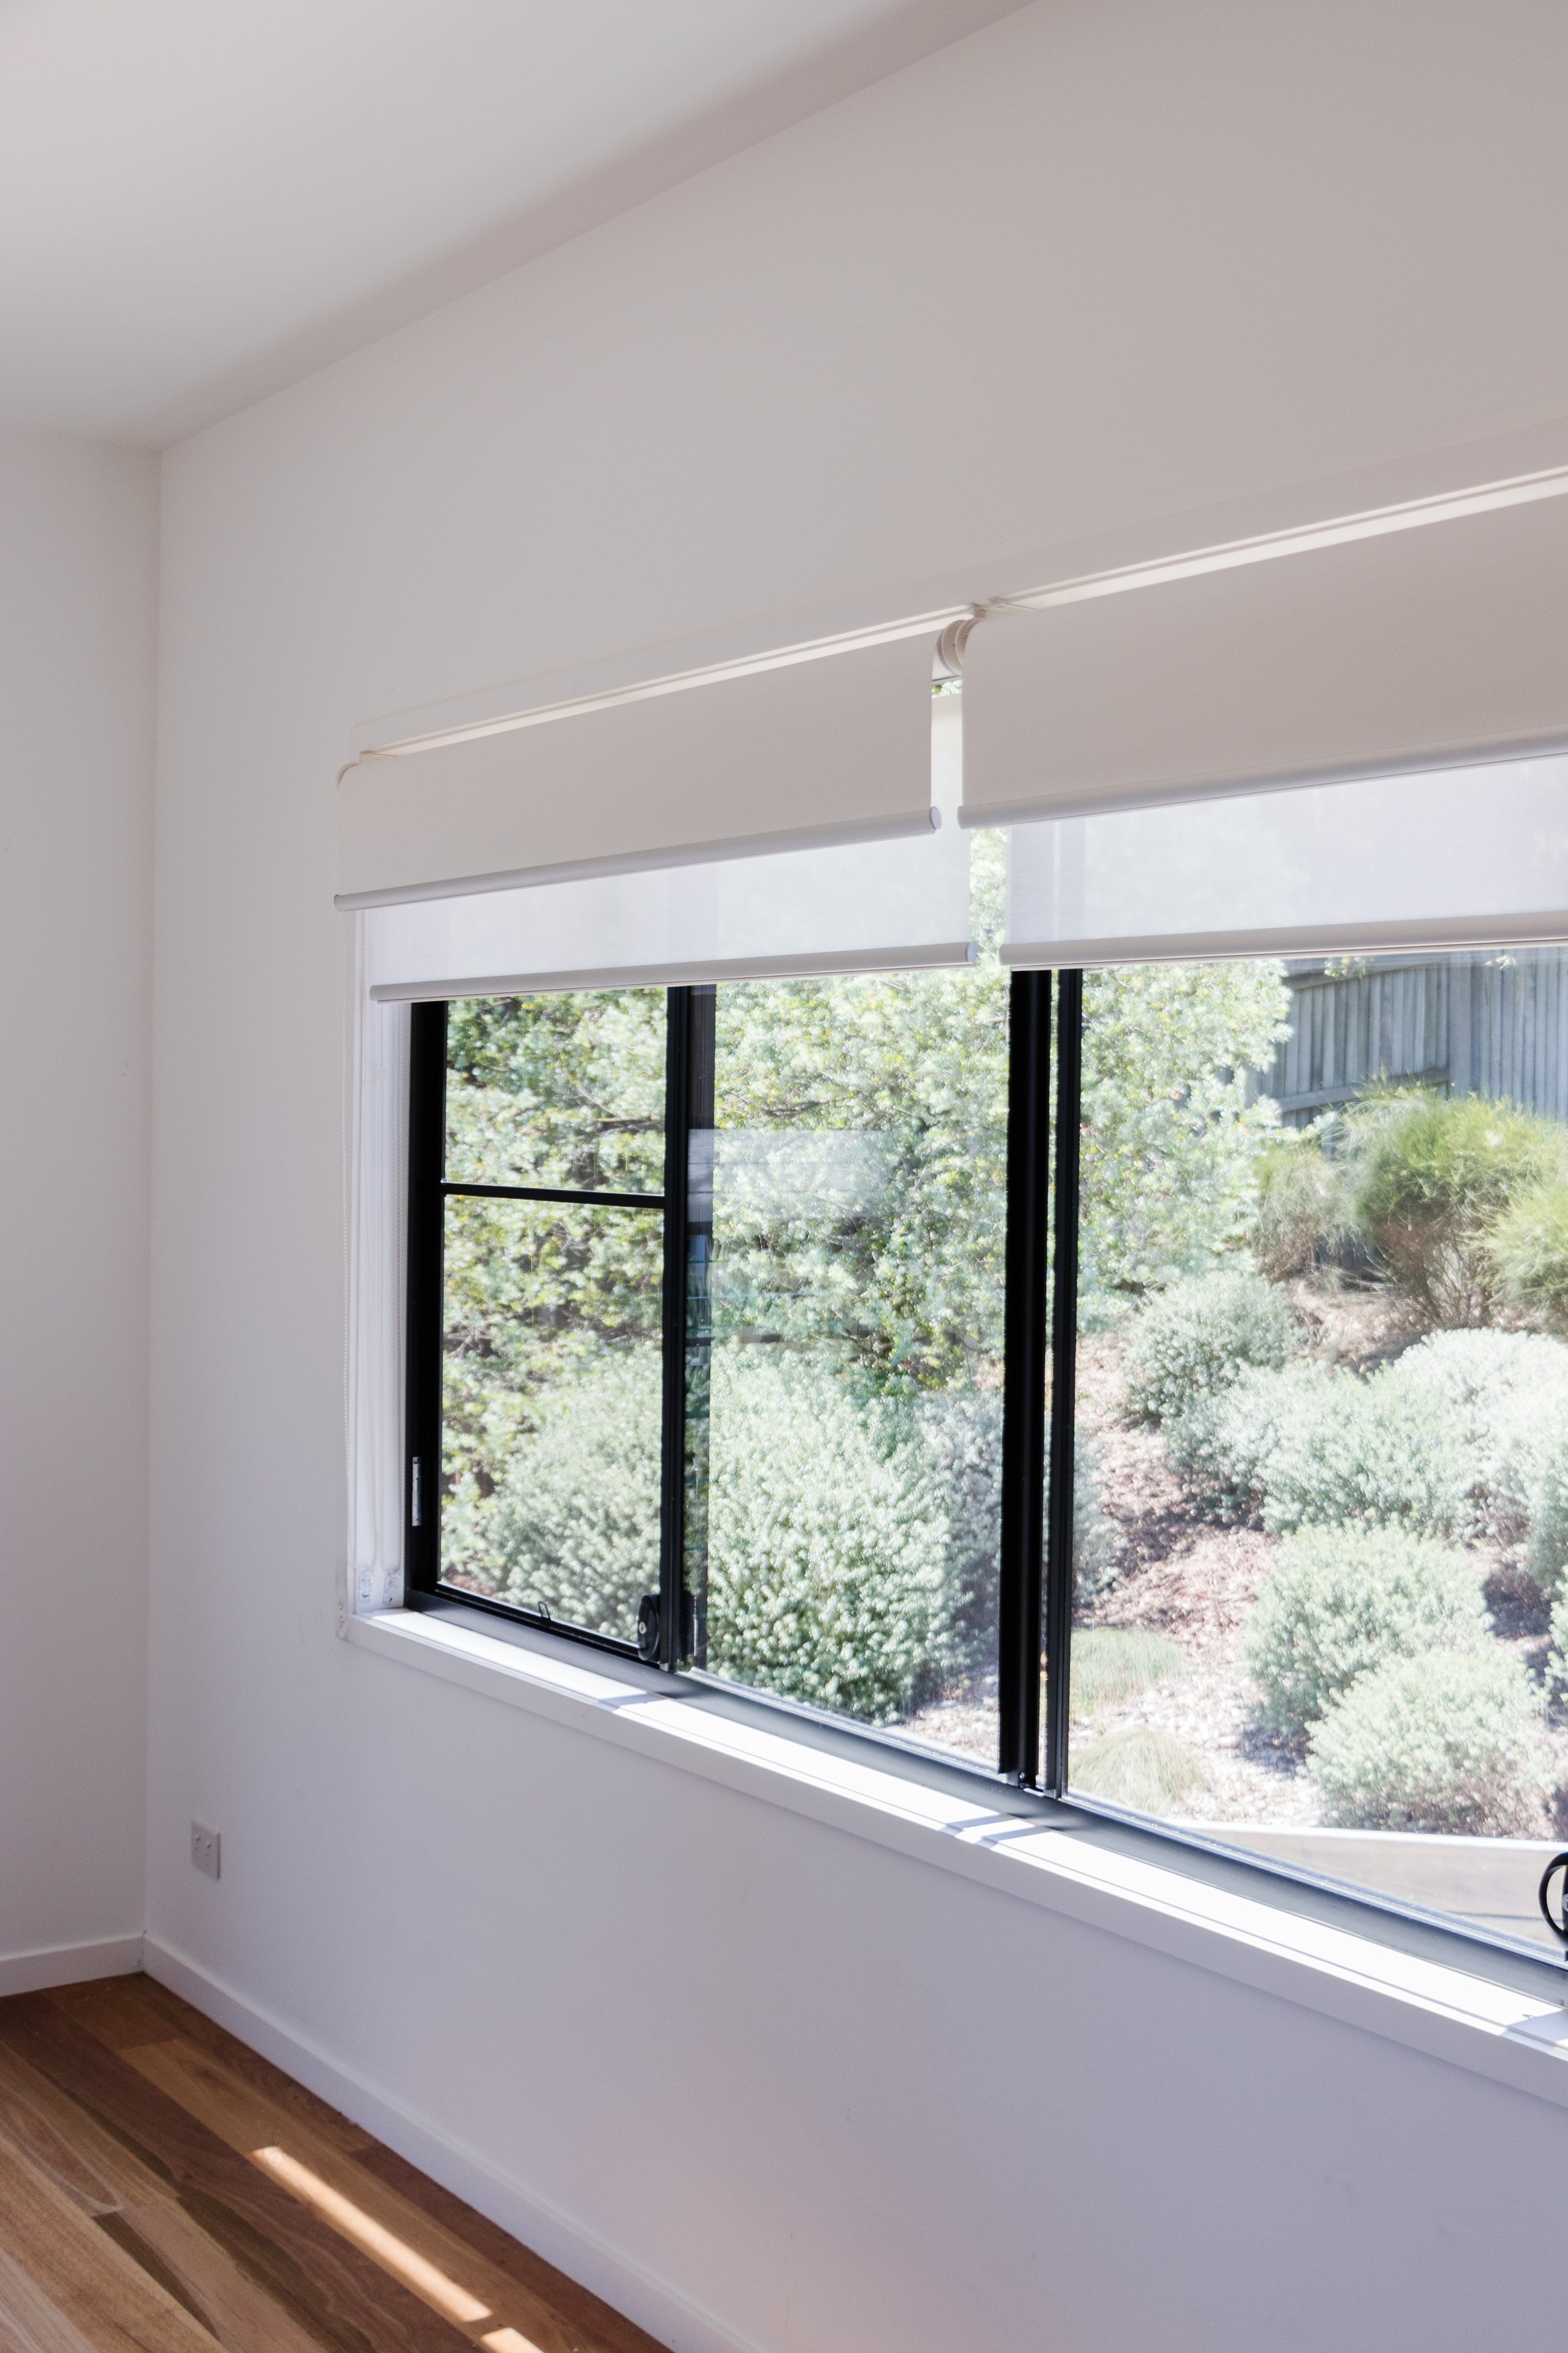 How We Upgraded The Blinds In Our Home (20 of 38).jpg